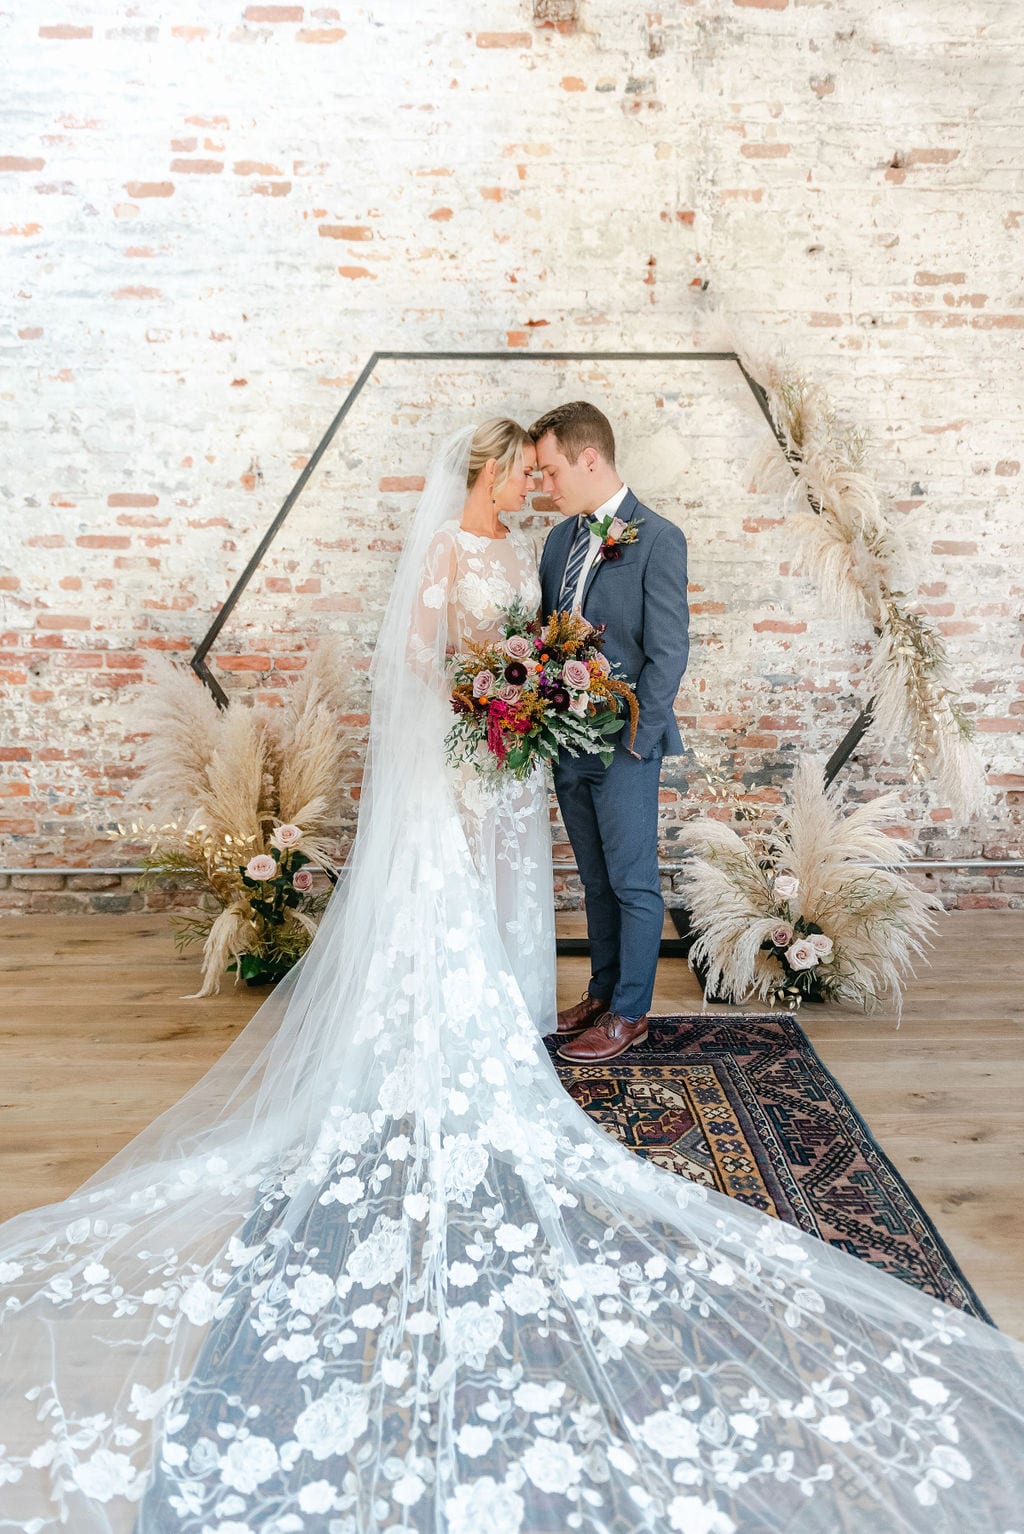 Bride and groom sharing a moment in front of their wedding arbor. The arbor is a metal octagon, and the background is brick. The bride is wearing a net dress with long veil and holding a colorful bouquet.